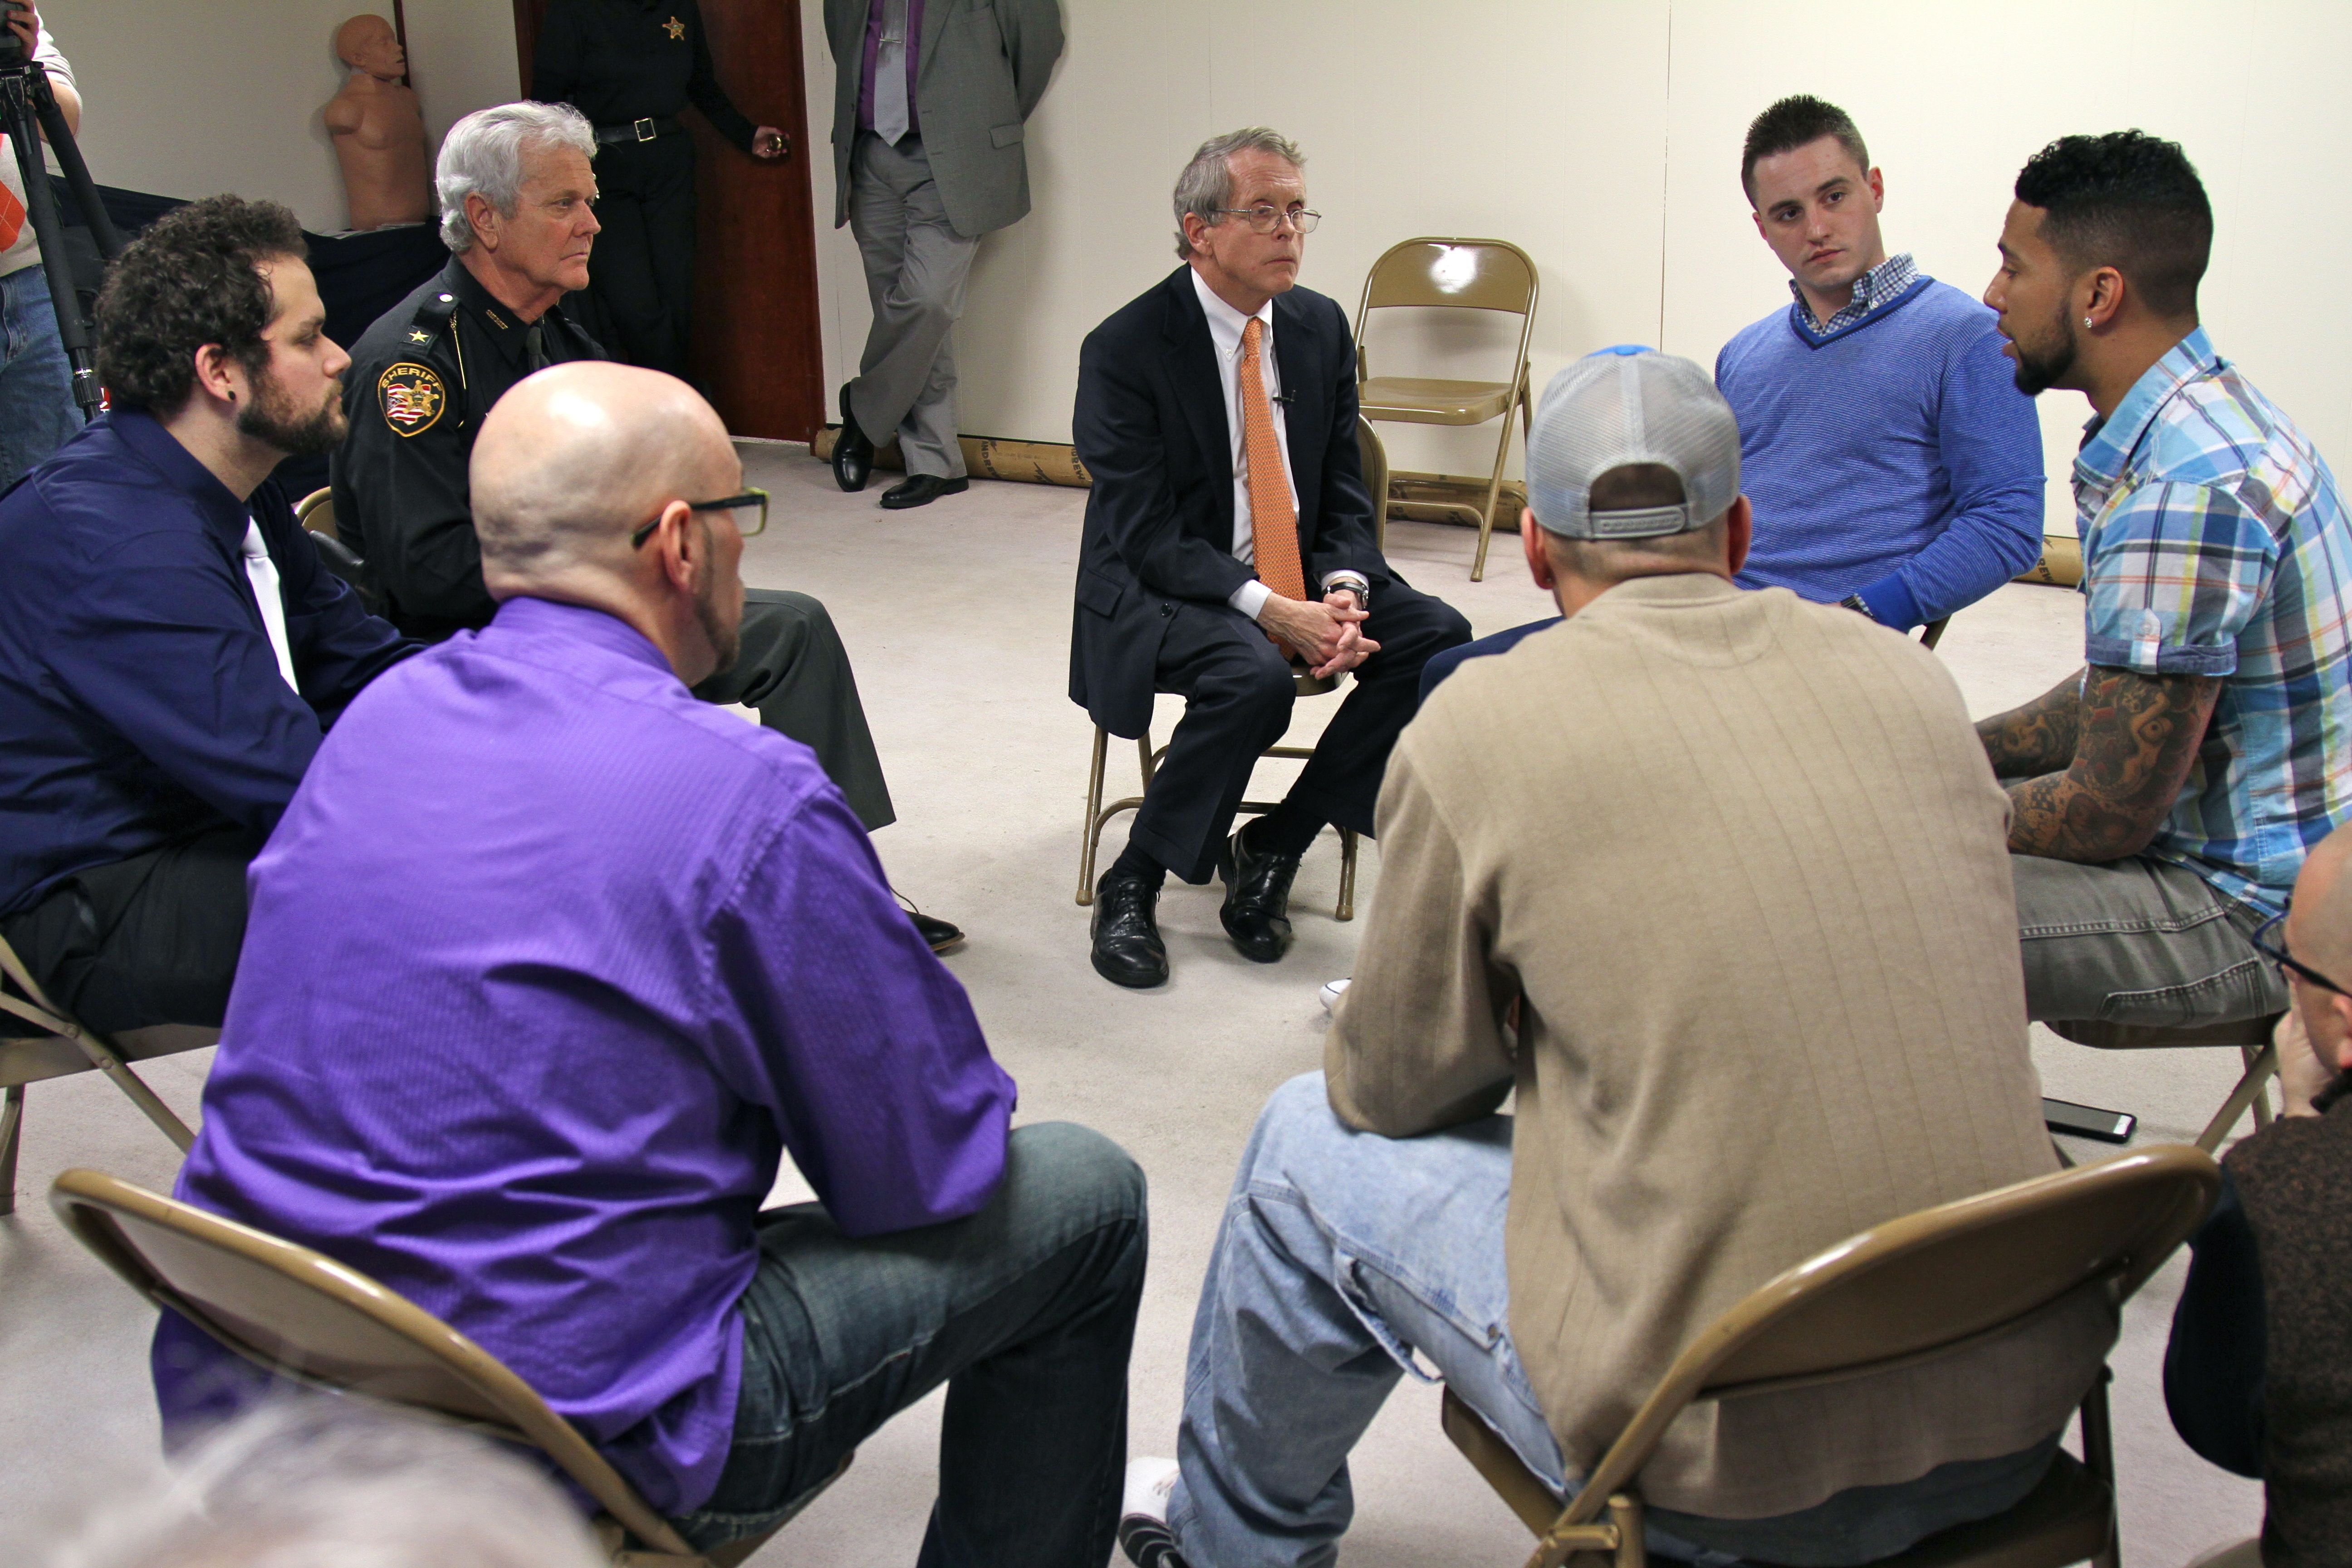 Ohio Attorney General Mike DeWine Visits D.A.R.T. (Drug Abuse Response Team) 